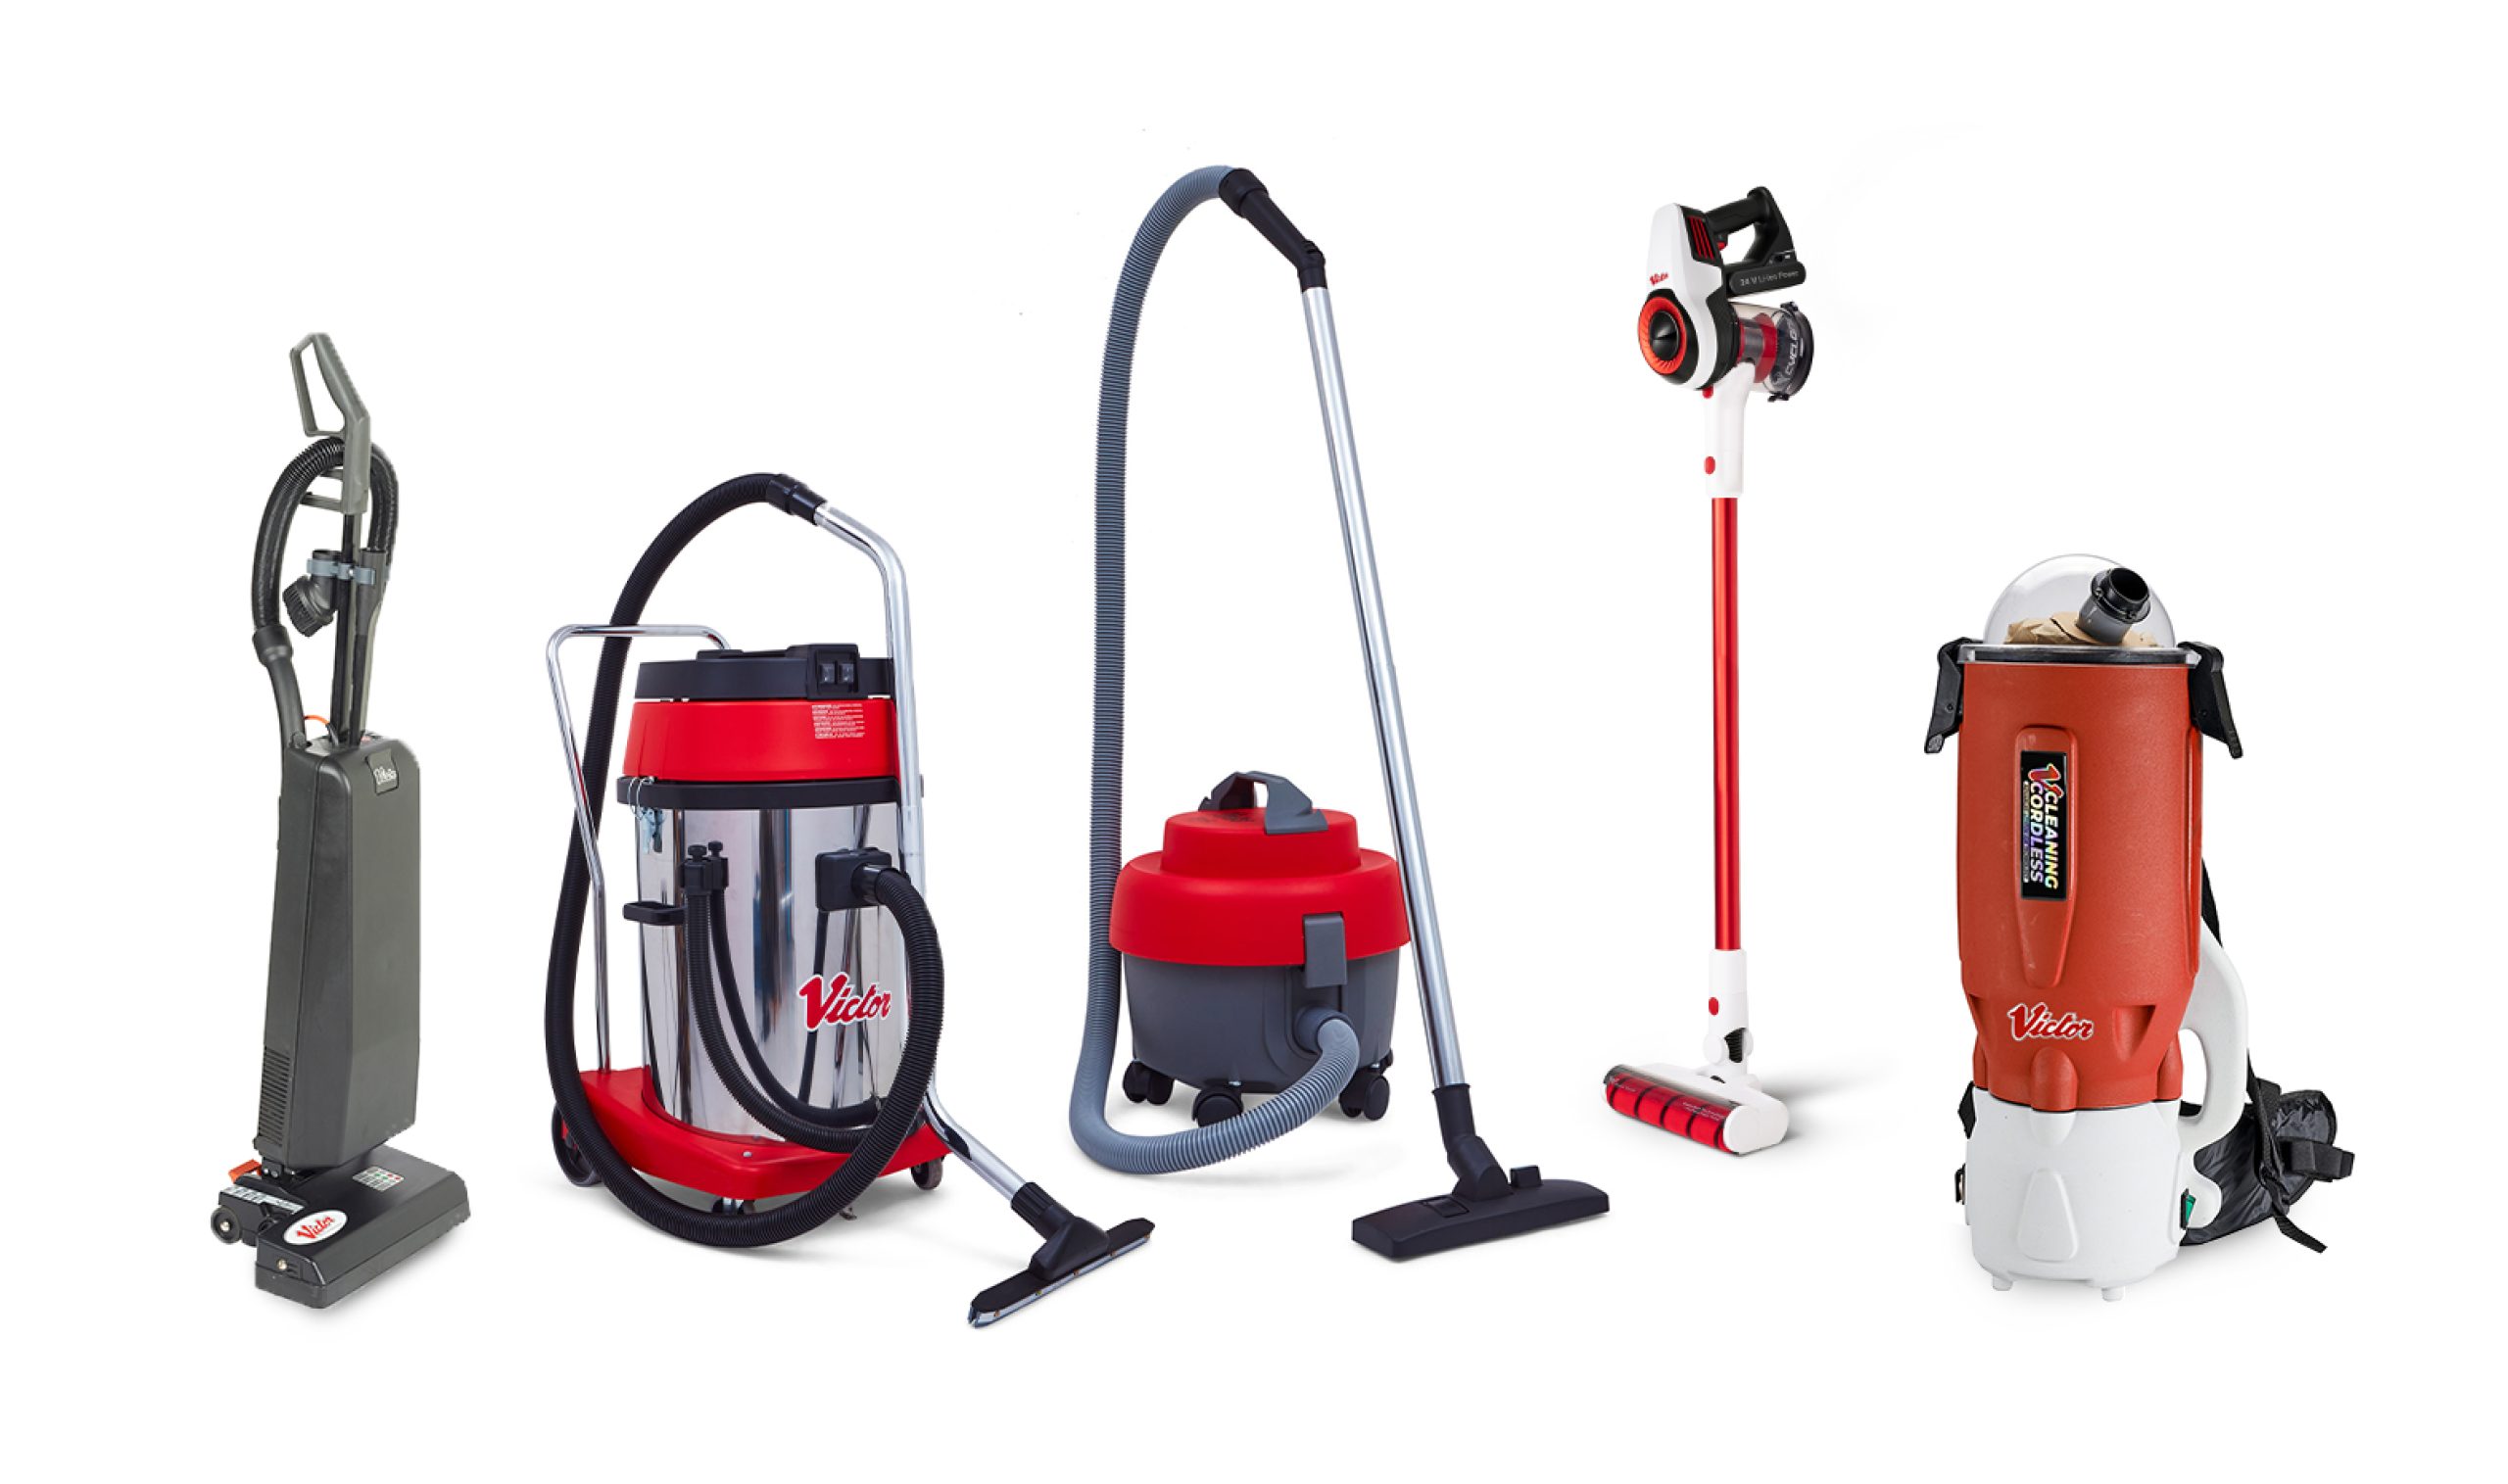 Vacuum Cleaners by victor floorcare